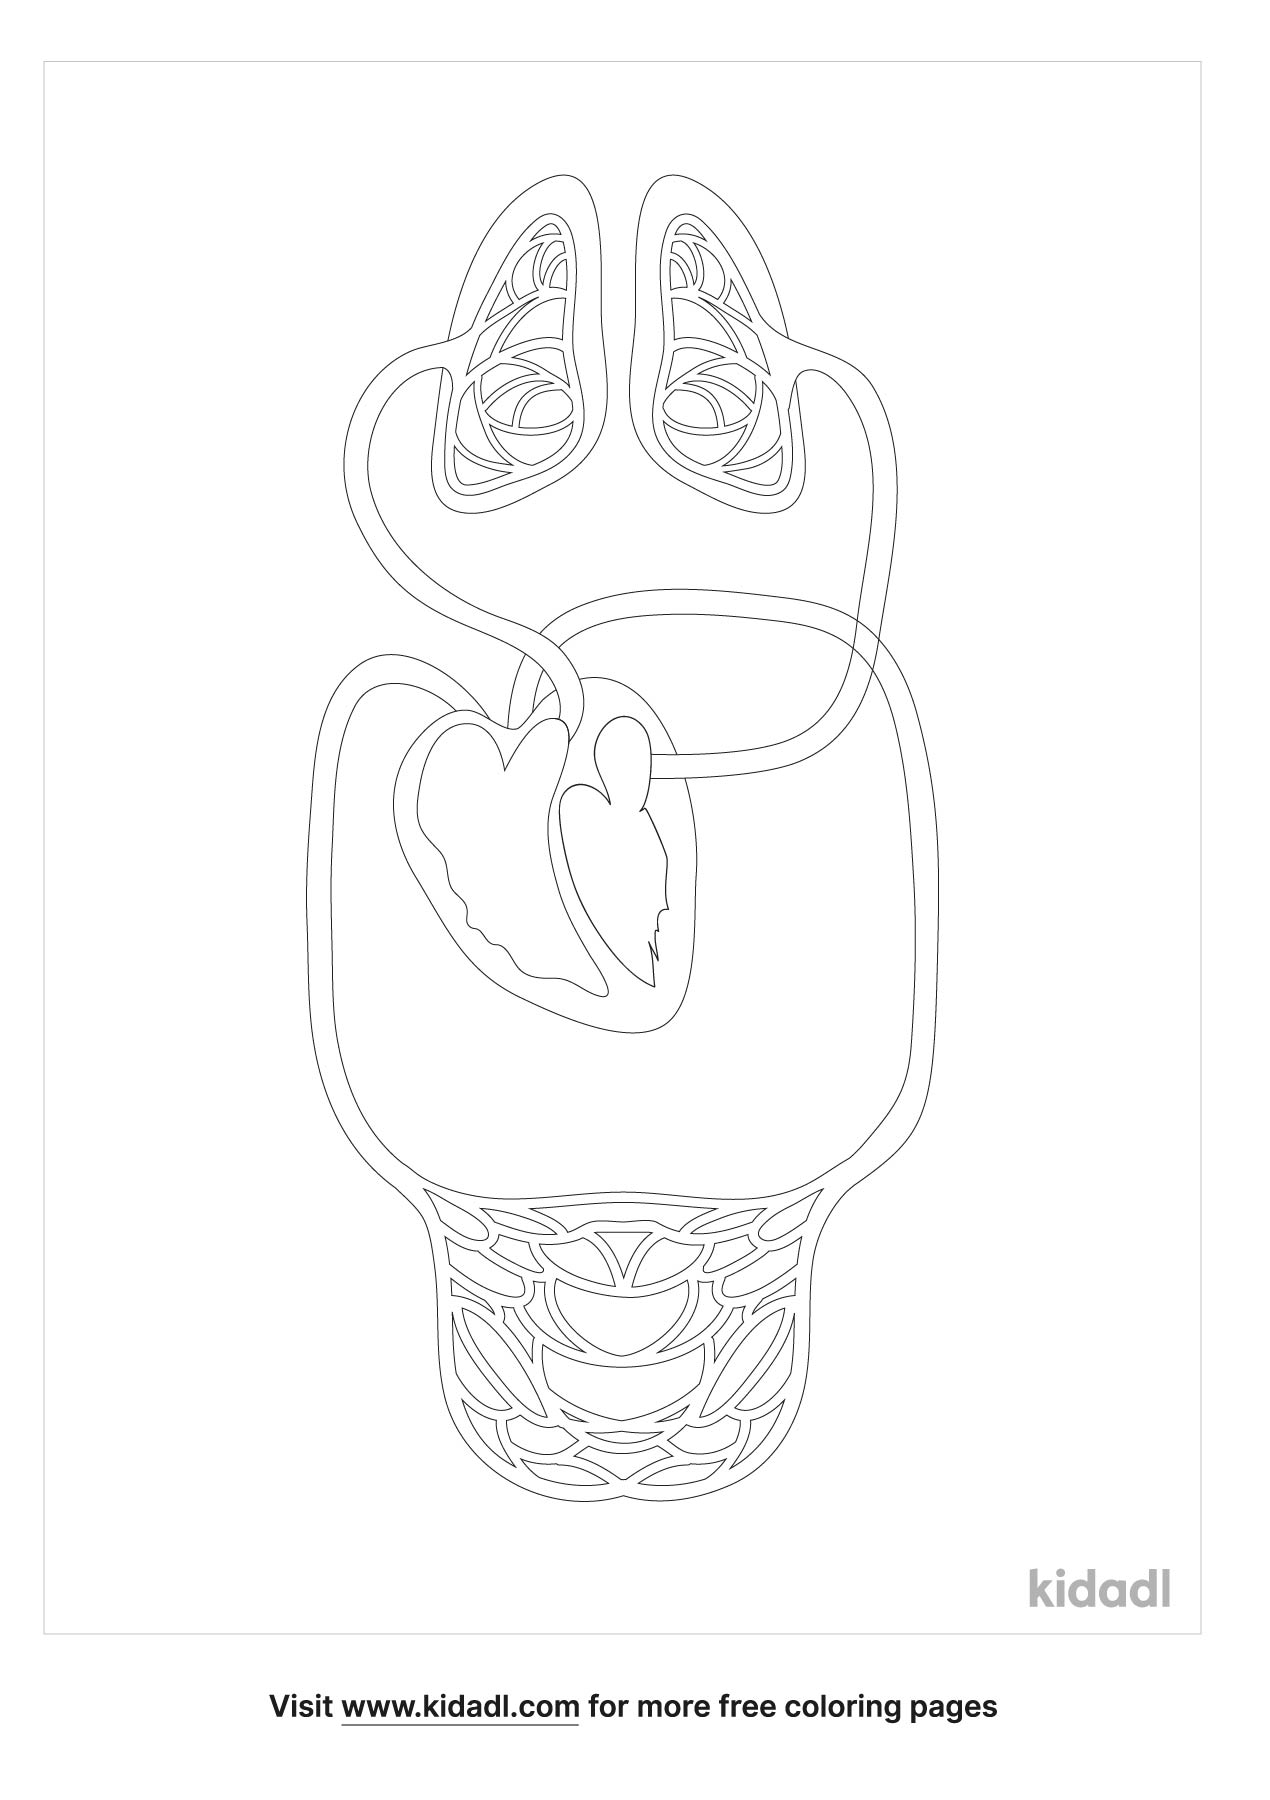 Circulatory System Coloring Pages | Free Human Body Coloring Pages | Kidadl